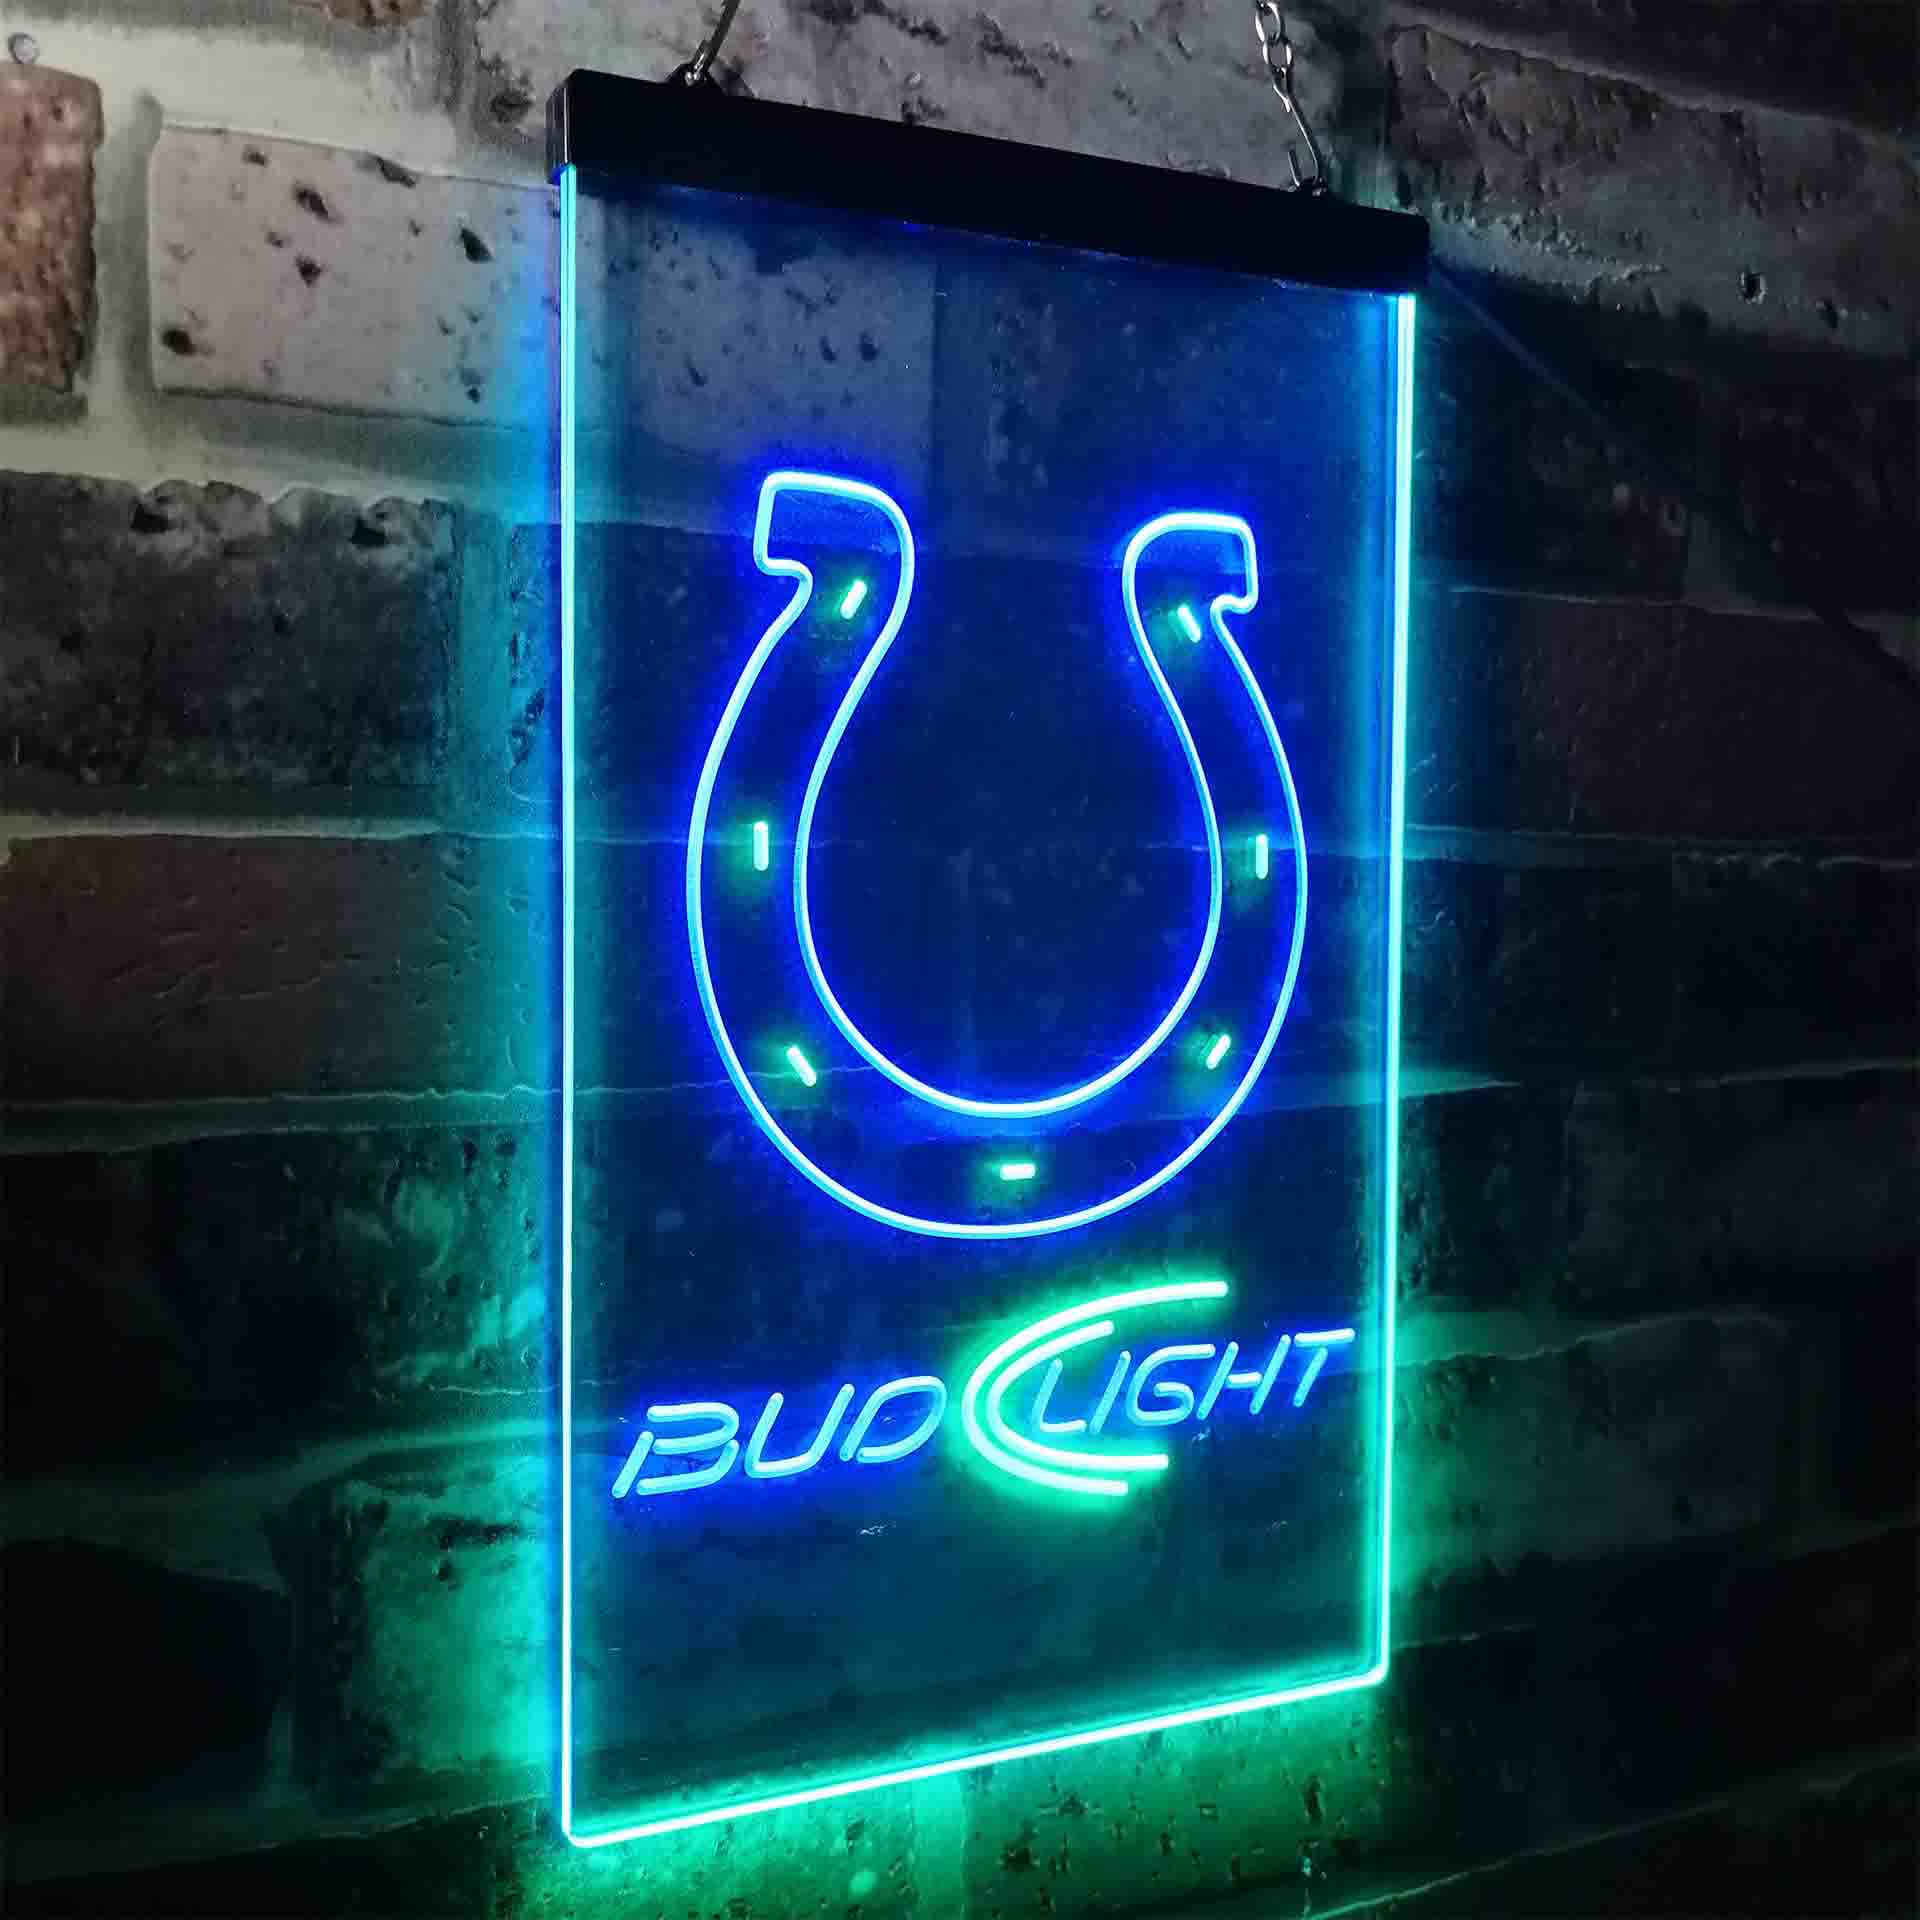 Indianapolis Colts Bud Light LED Neon Sign